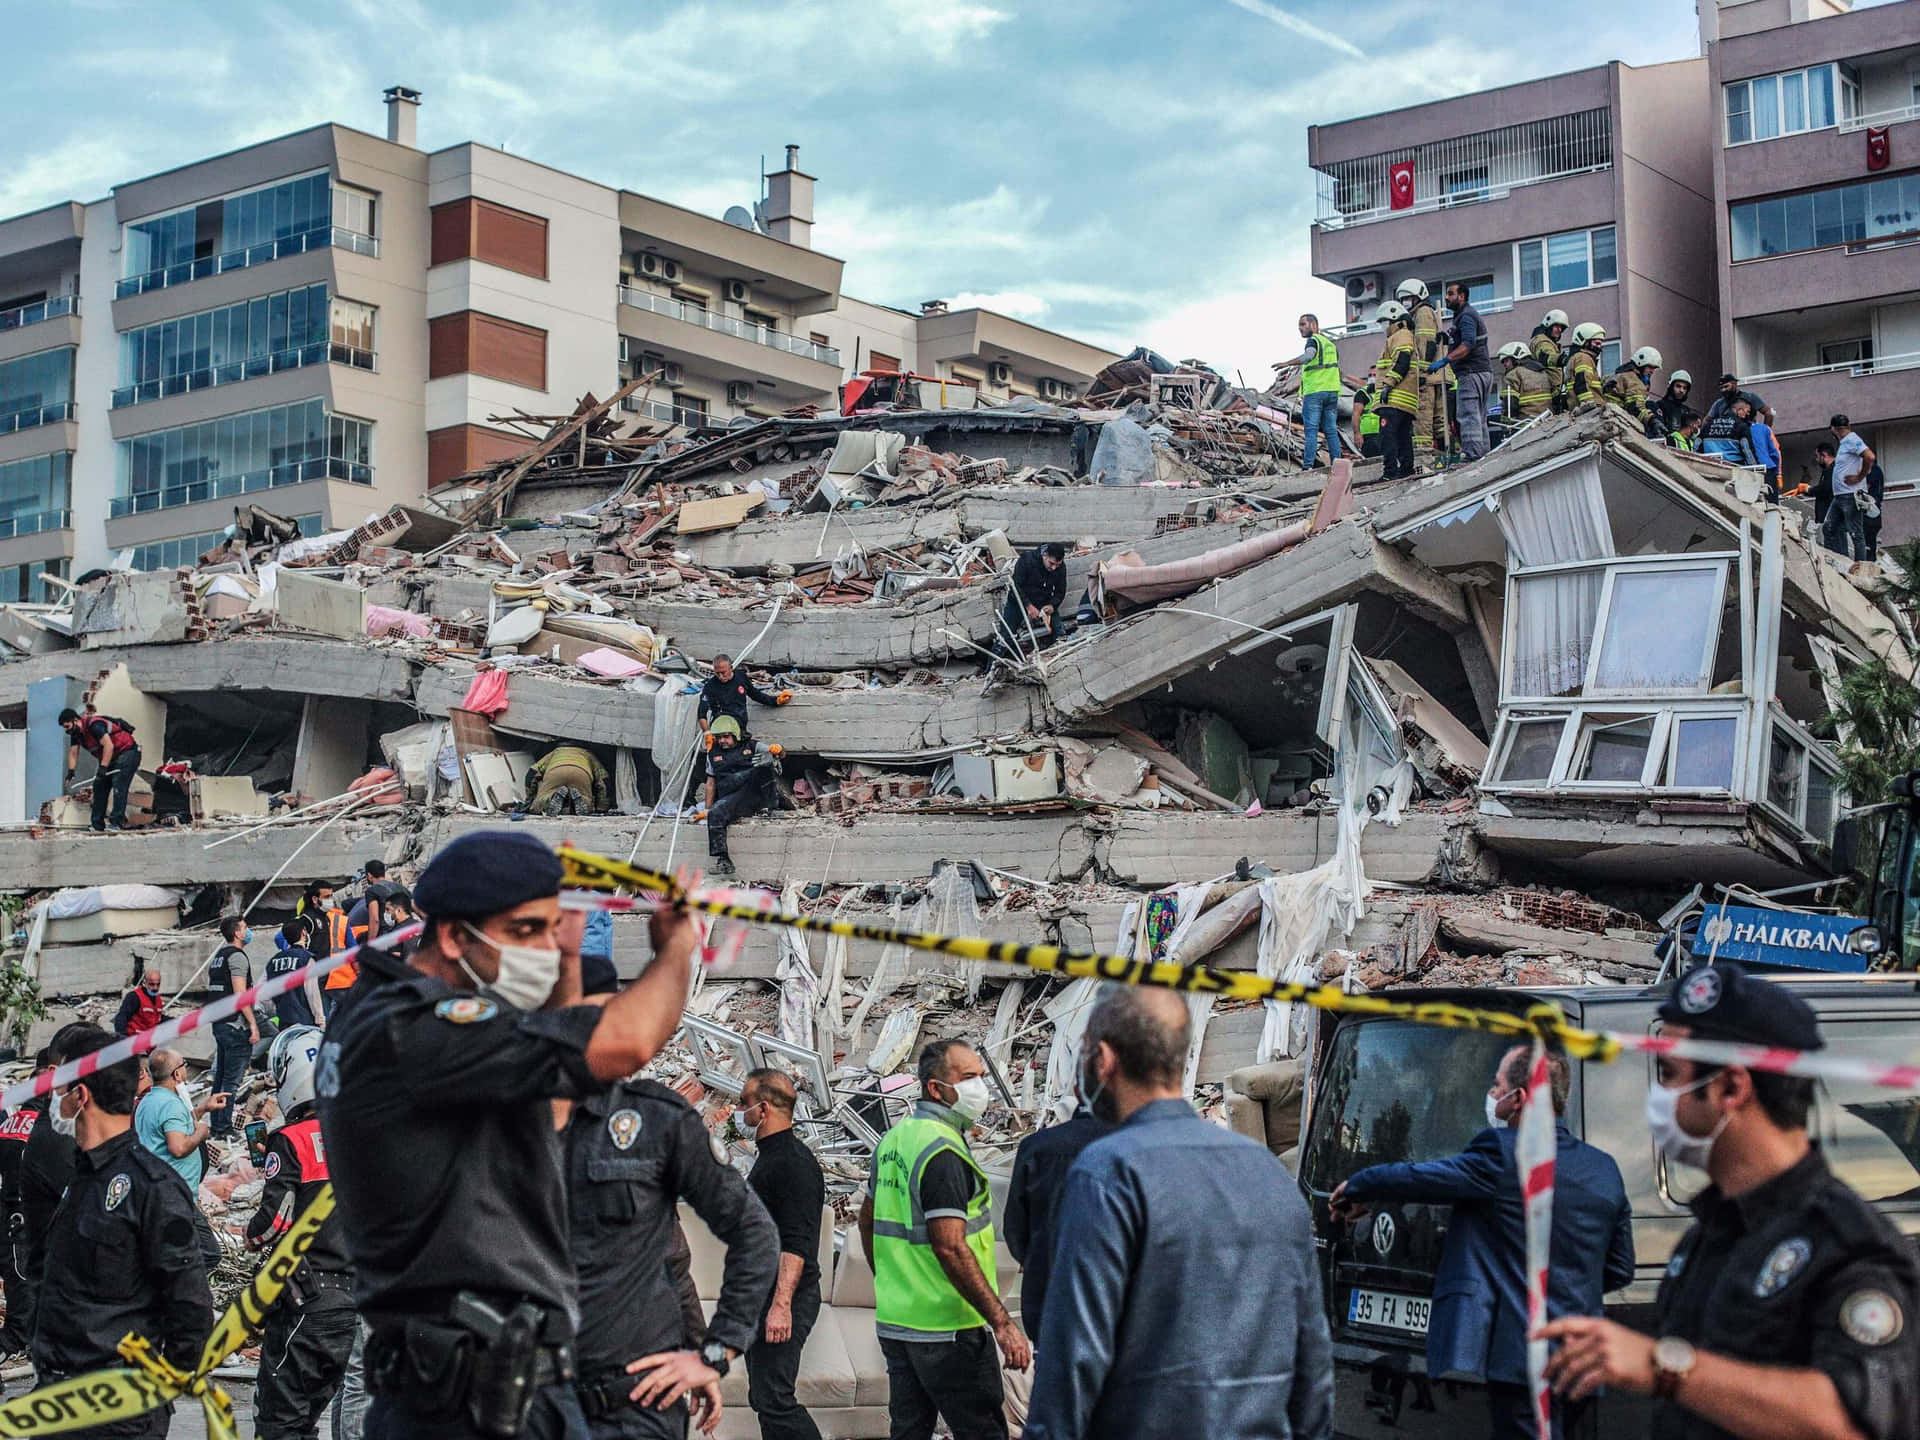 A Group Of People Standing Around A Building That Has Collapsed